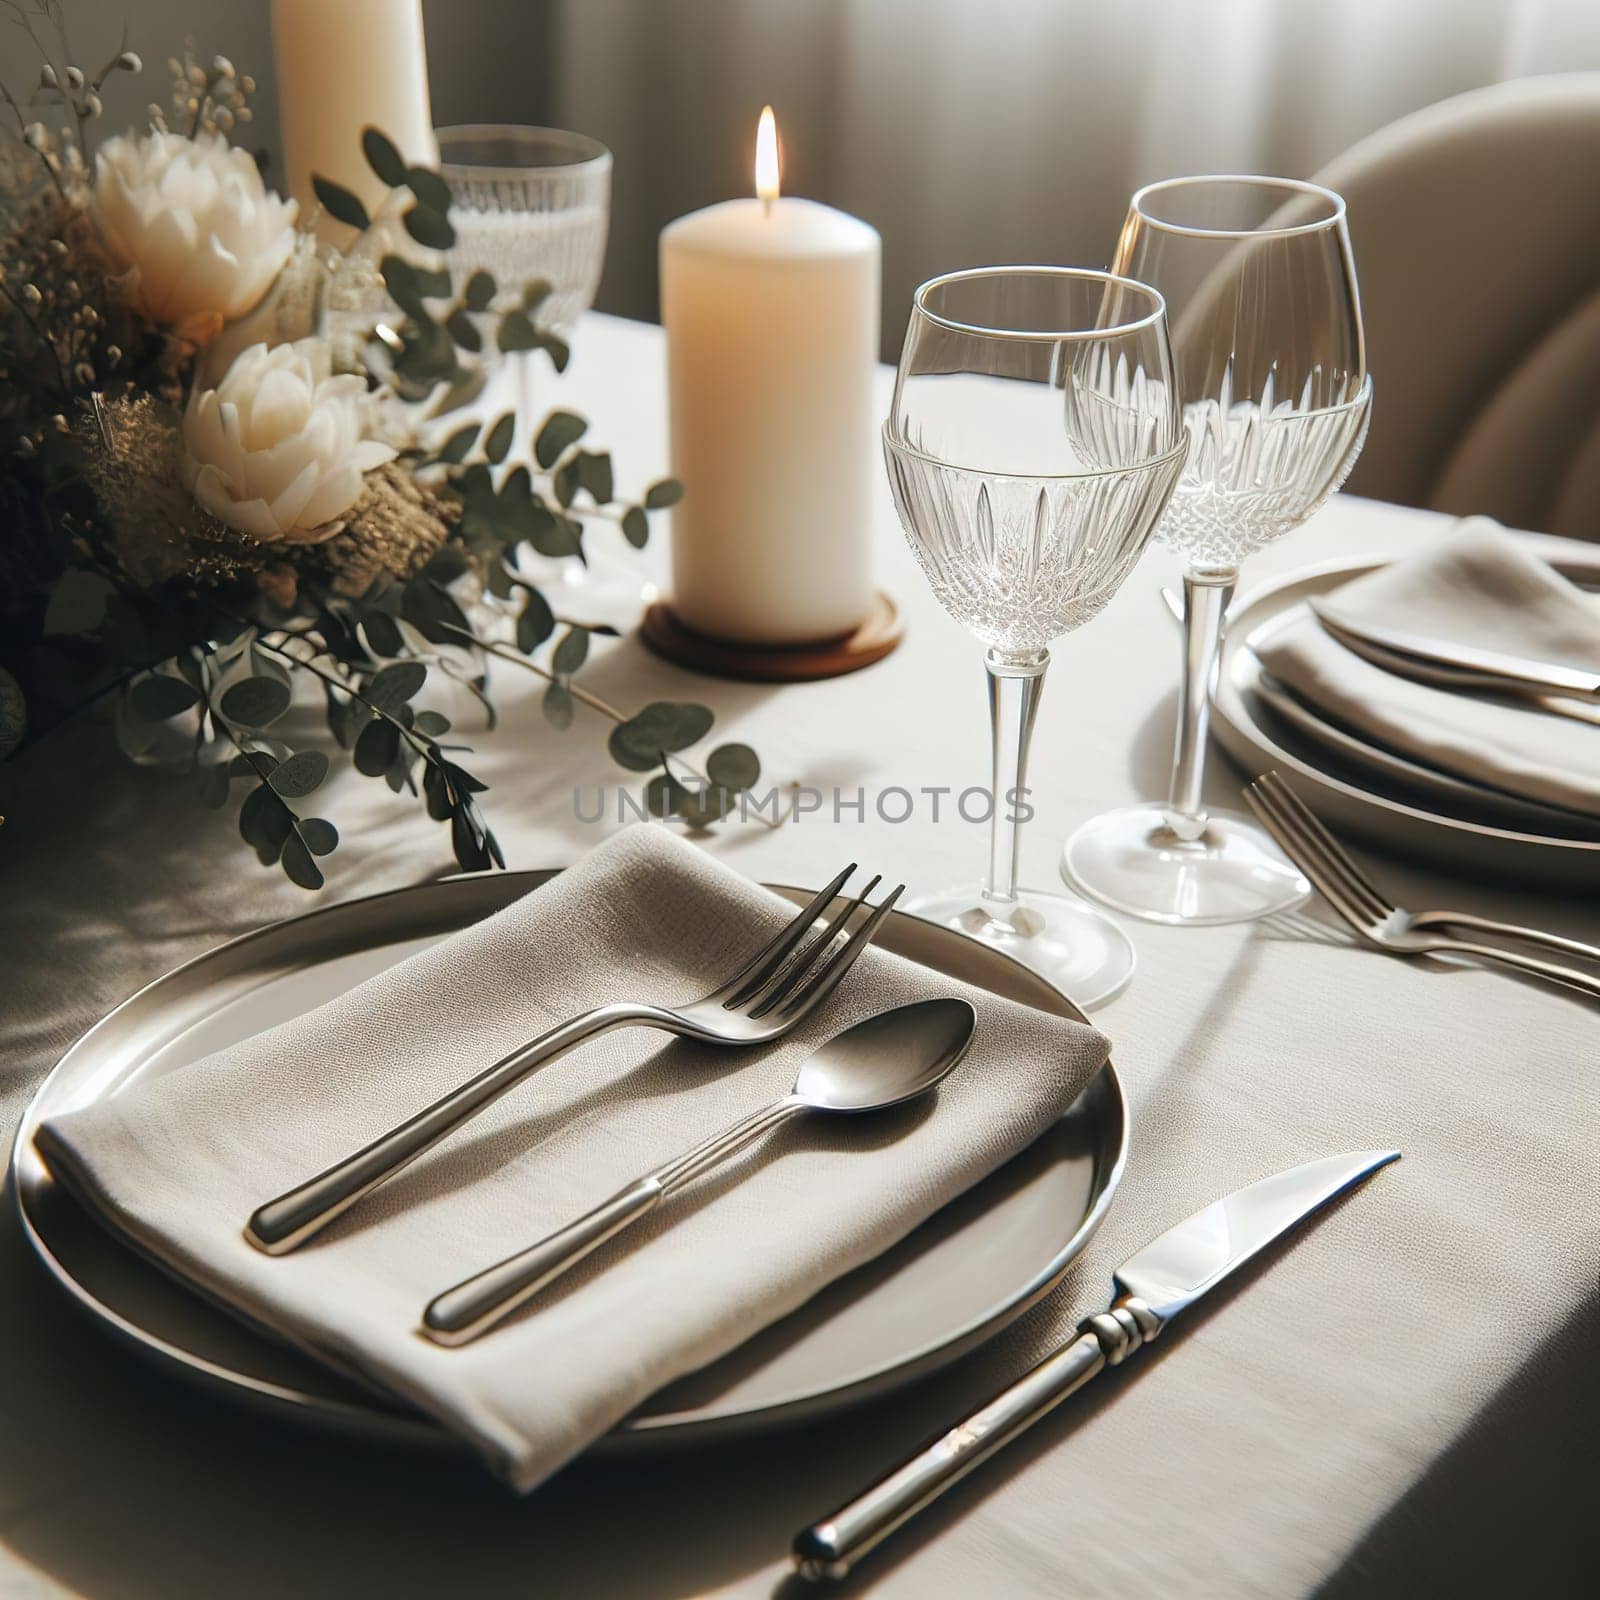 Beautifully set table for a romantic dinner by gordiza